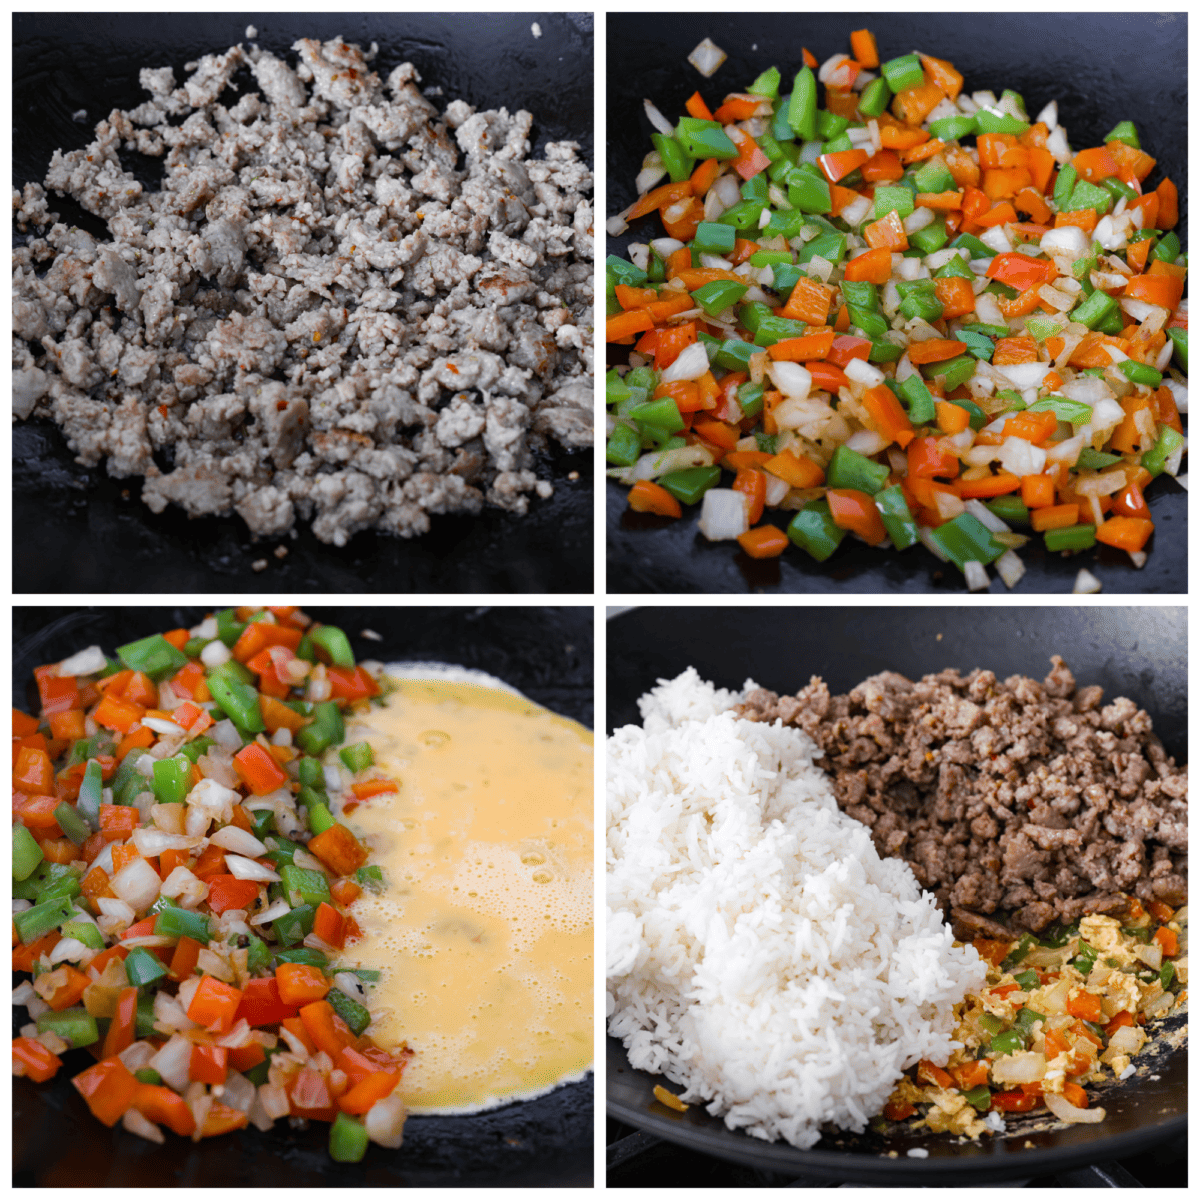 4 pictures showing how to cook the meat, veggies and eggs. 